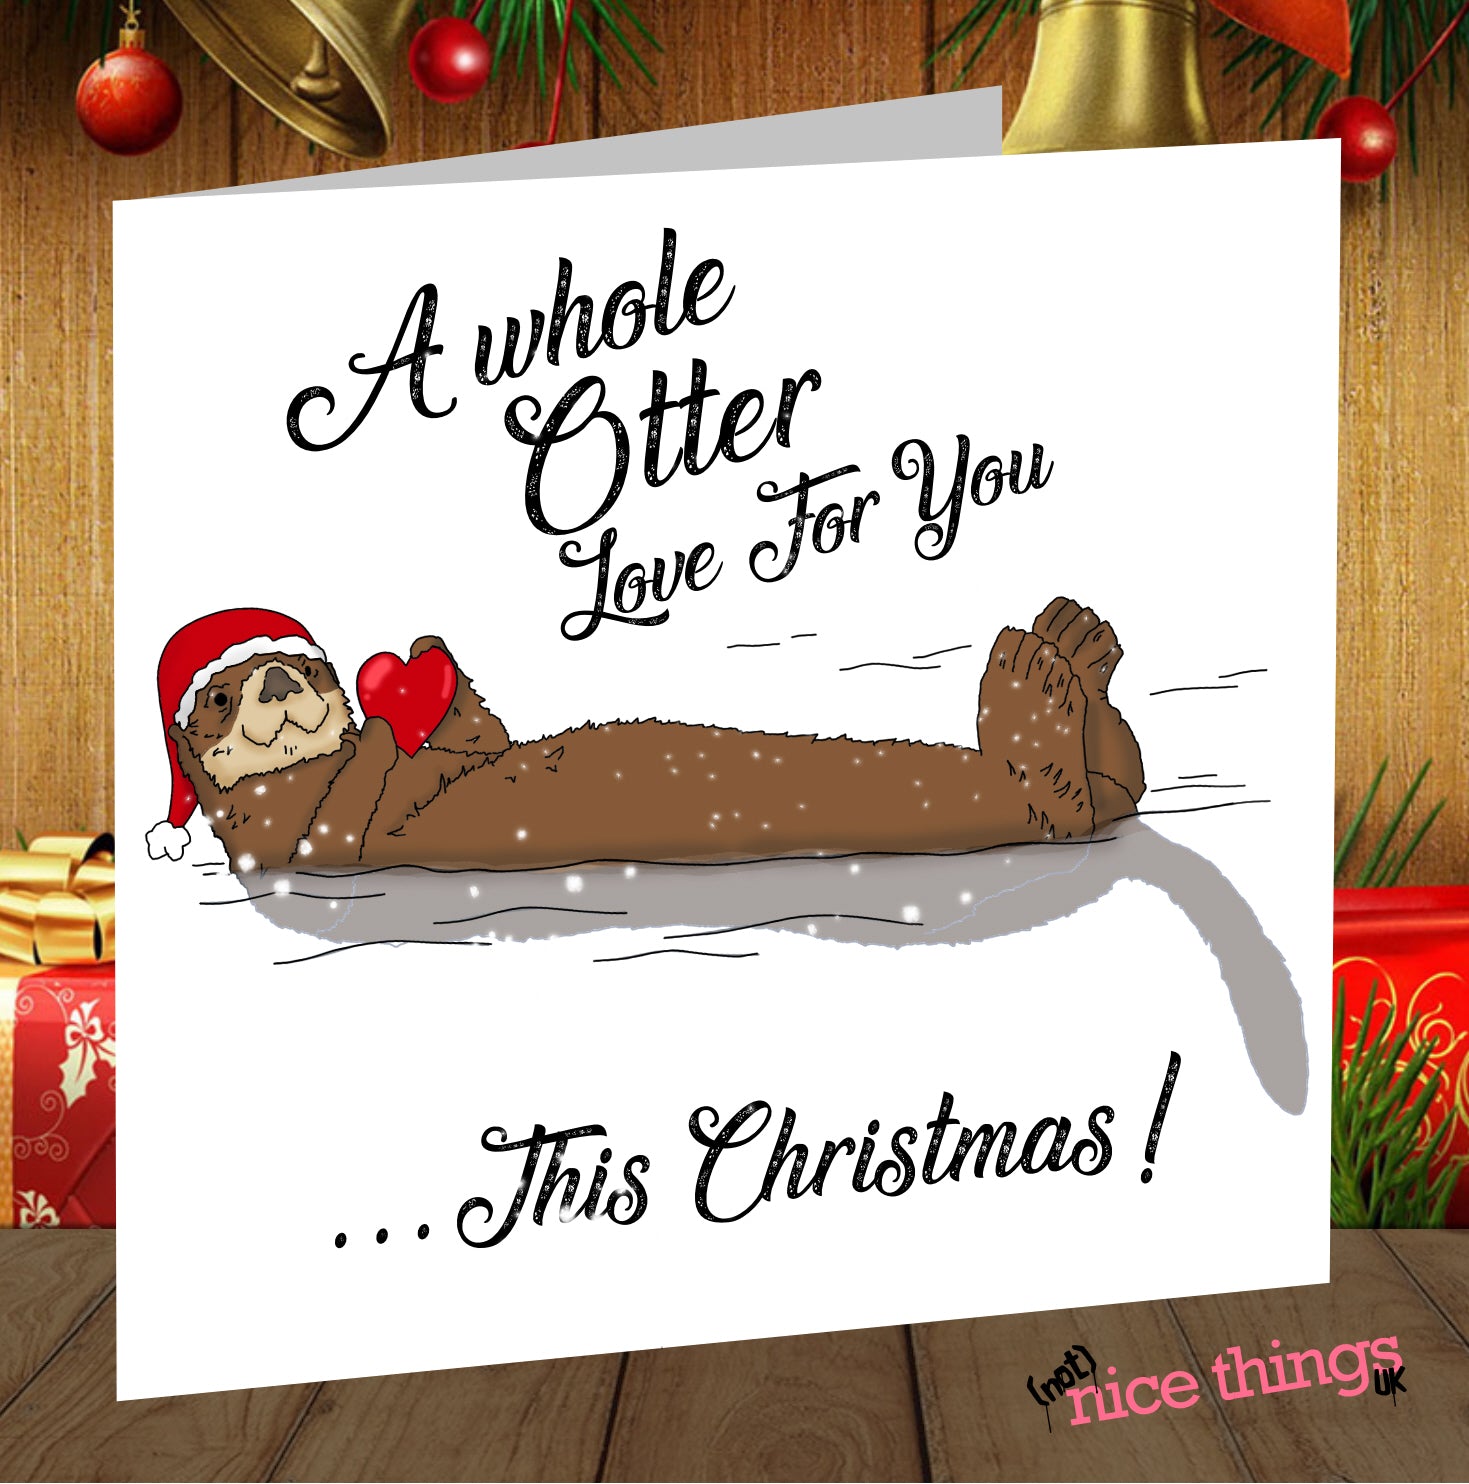 Otter Lover For you Funny Christmas Card, Cute Christmas Greetings Card, Cards For Her, Girlfriend, Wife